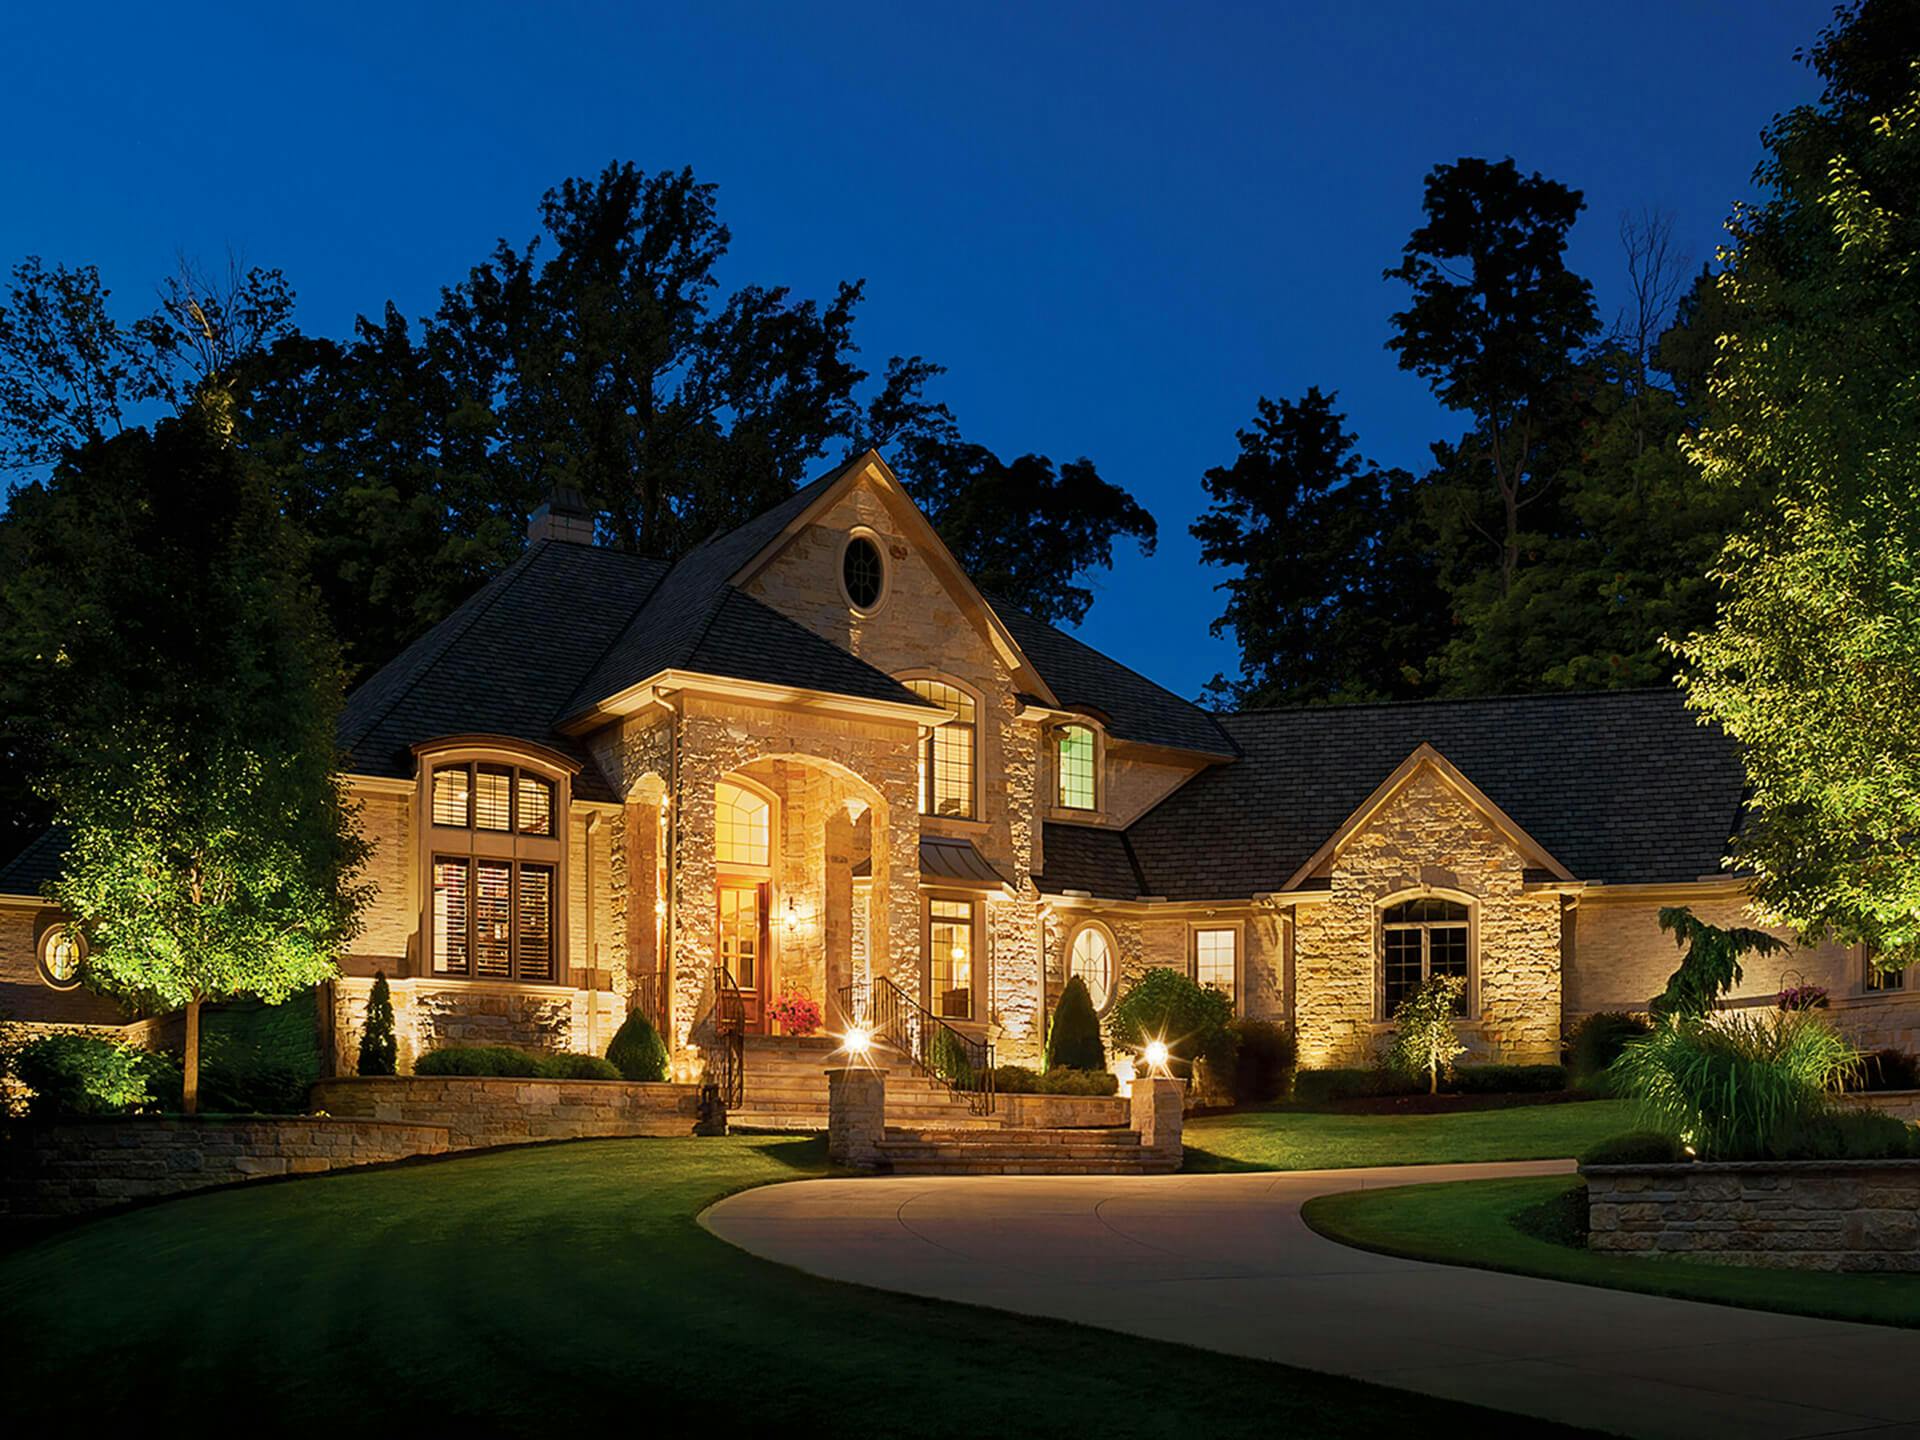 Landscape of a well-lit Hinckley Home